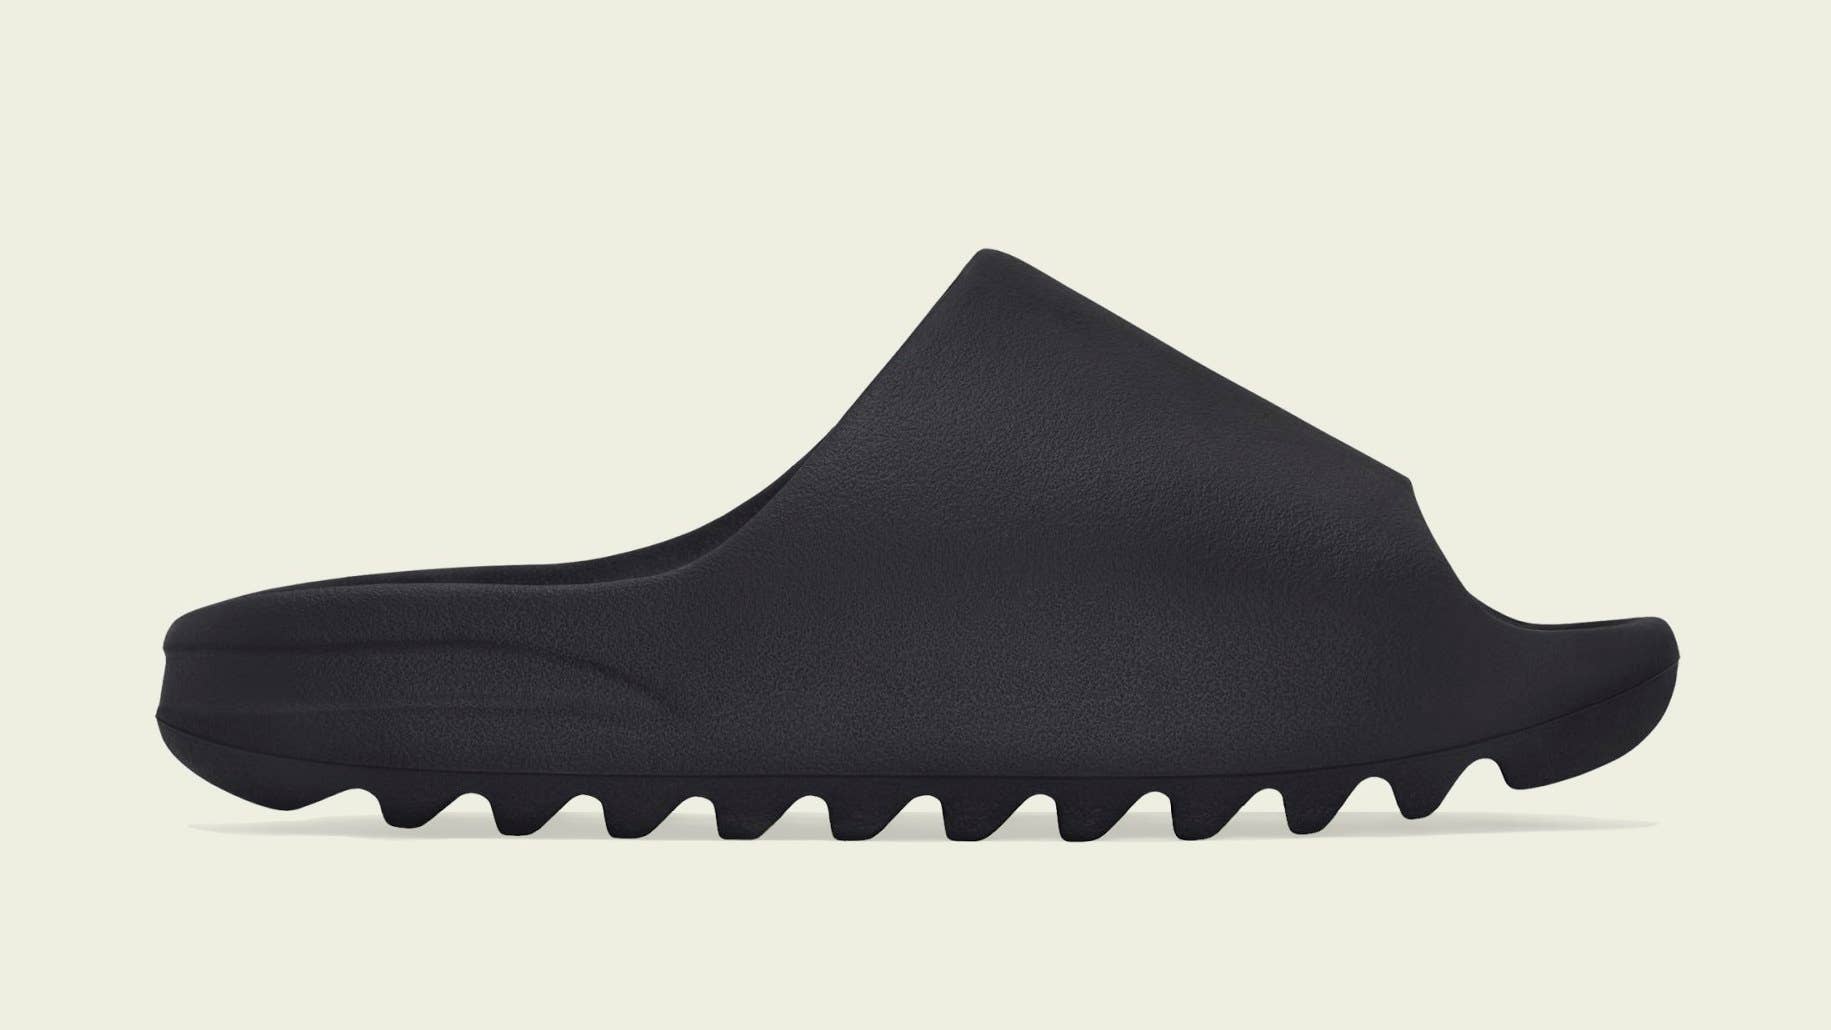 Adidas Yeezy Slide 'Onyx' HQ6448 Lateral